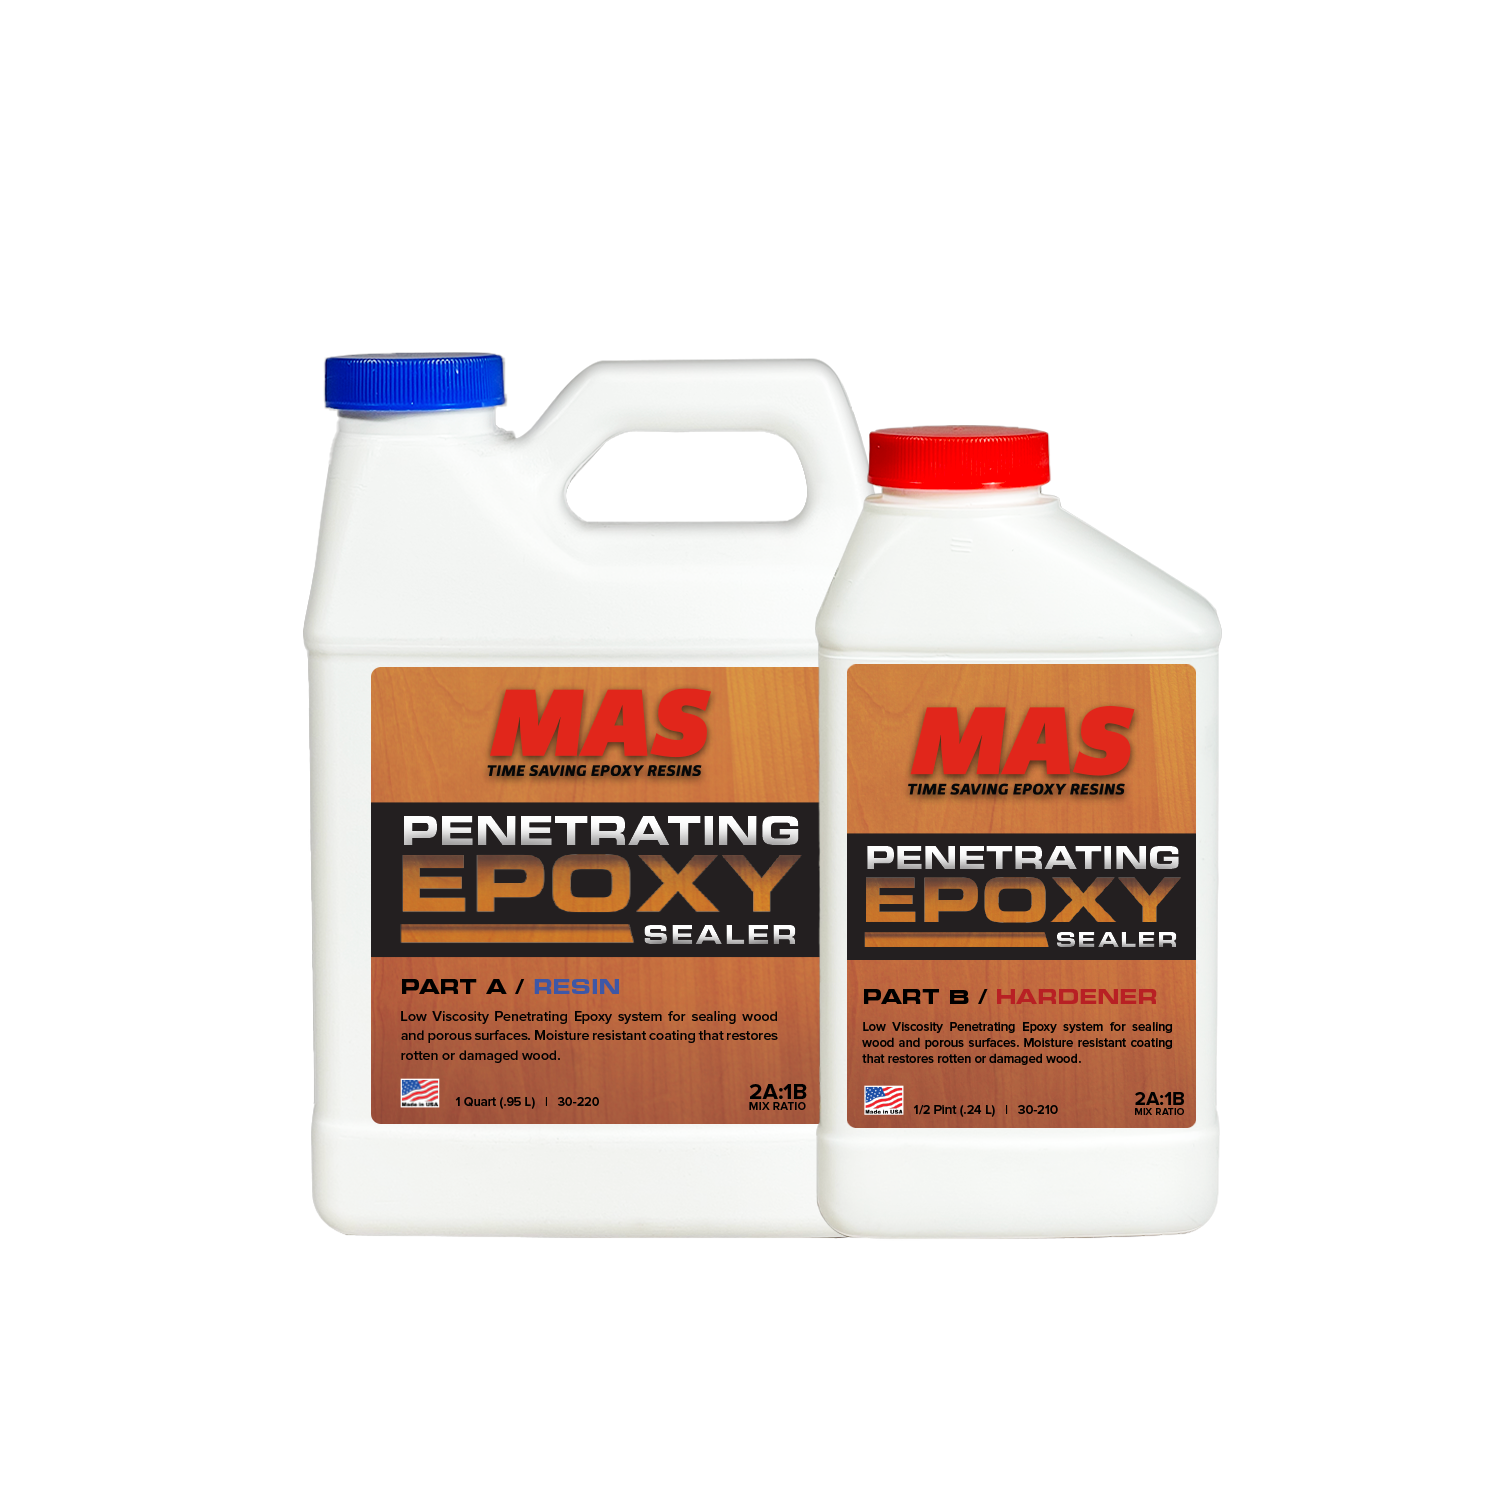 How resistant is this penetrating epoxy sealer for plywood in outdoor conditions? ie sun, ice, rain etc.